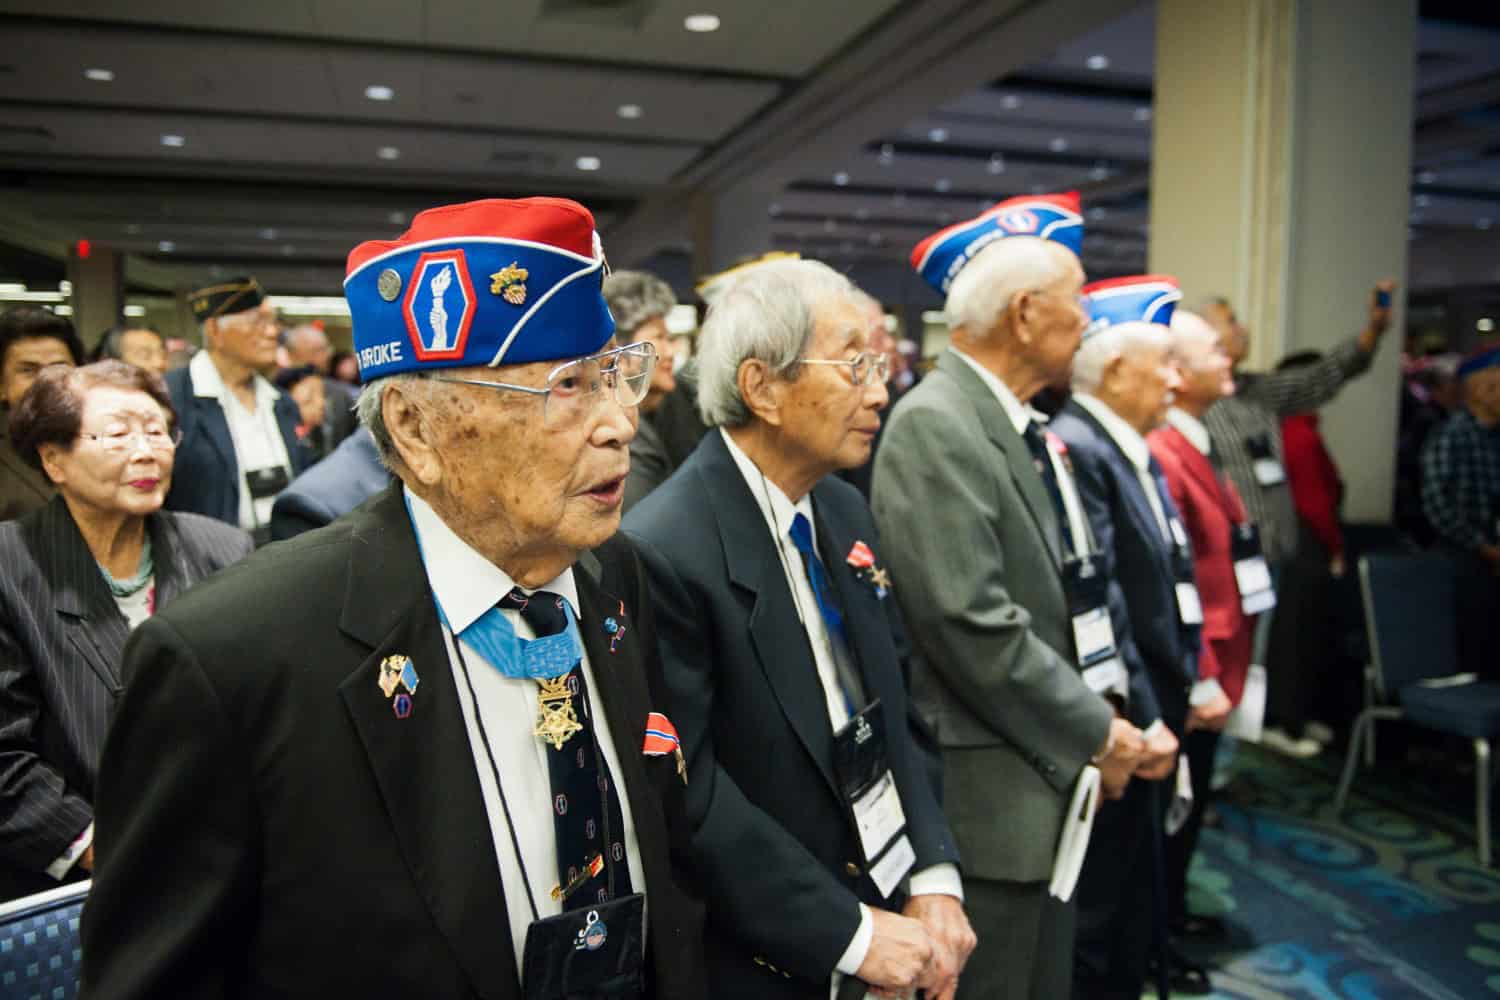 Survivors of the most decorated unit in WW2, the 442nd, at a tribute event in Washington, D.C.